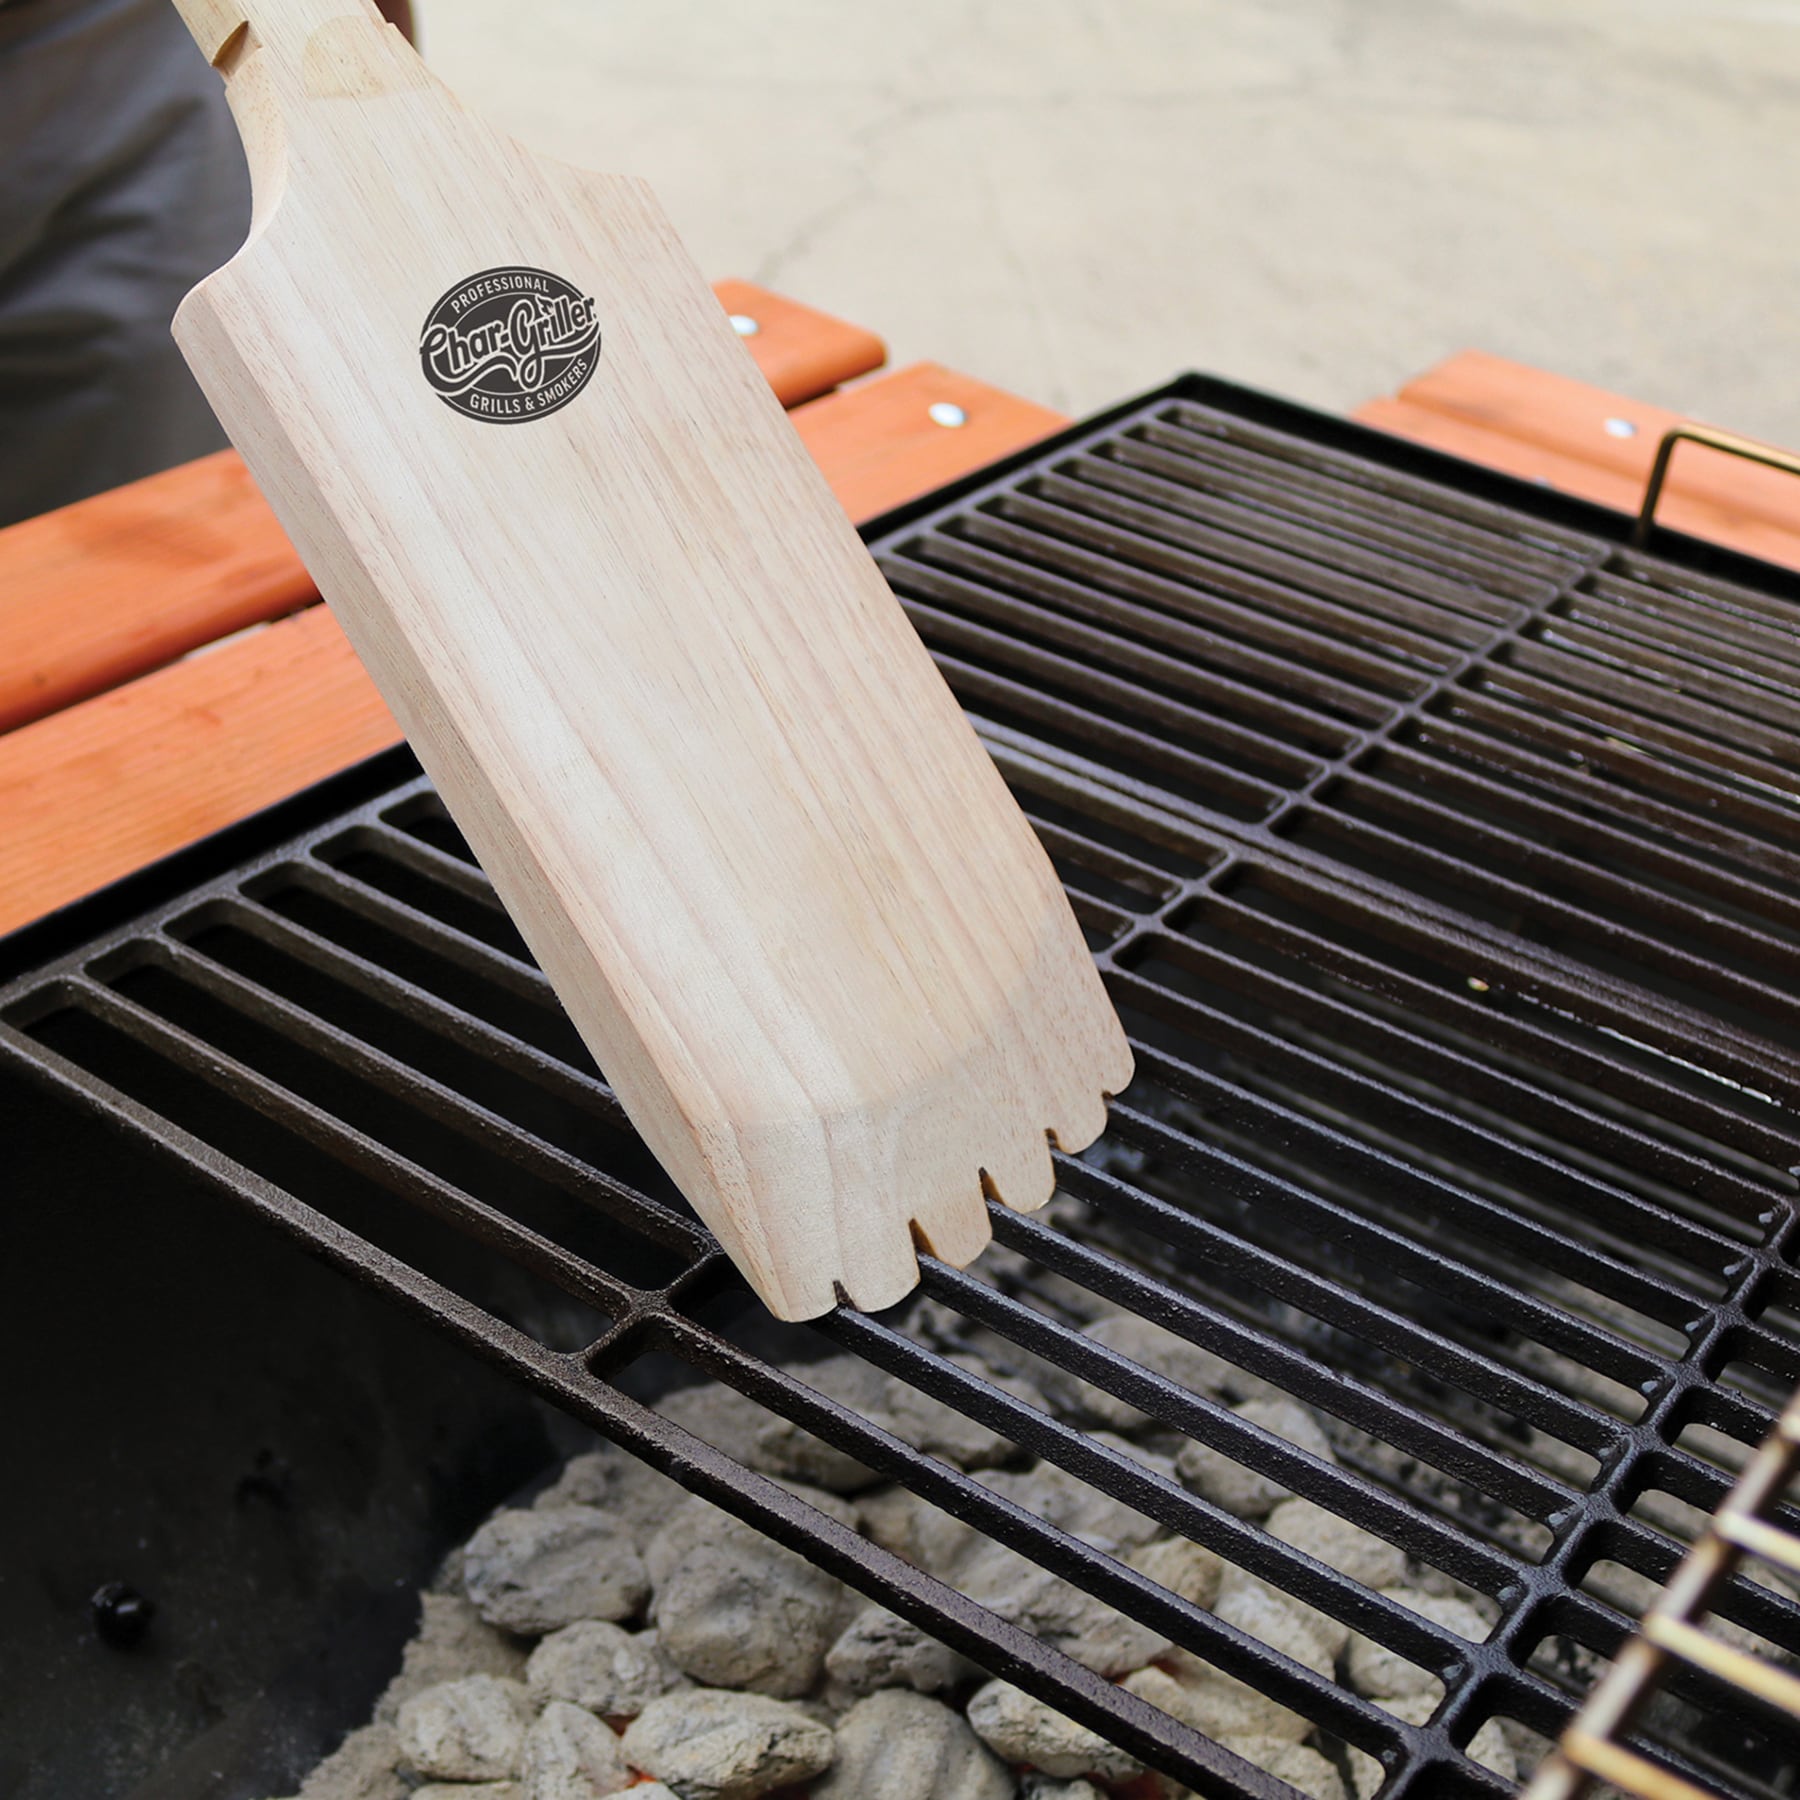 Cleaning Barbecue Scraper Portable Metal BBQ Grills Grate Cleaner